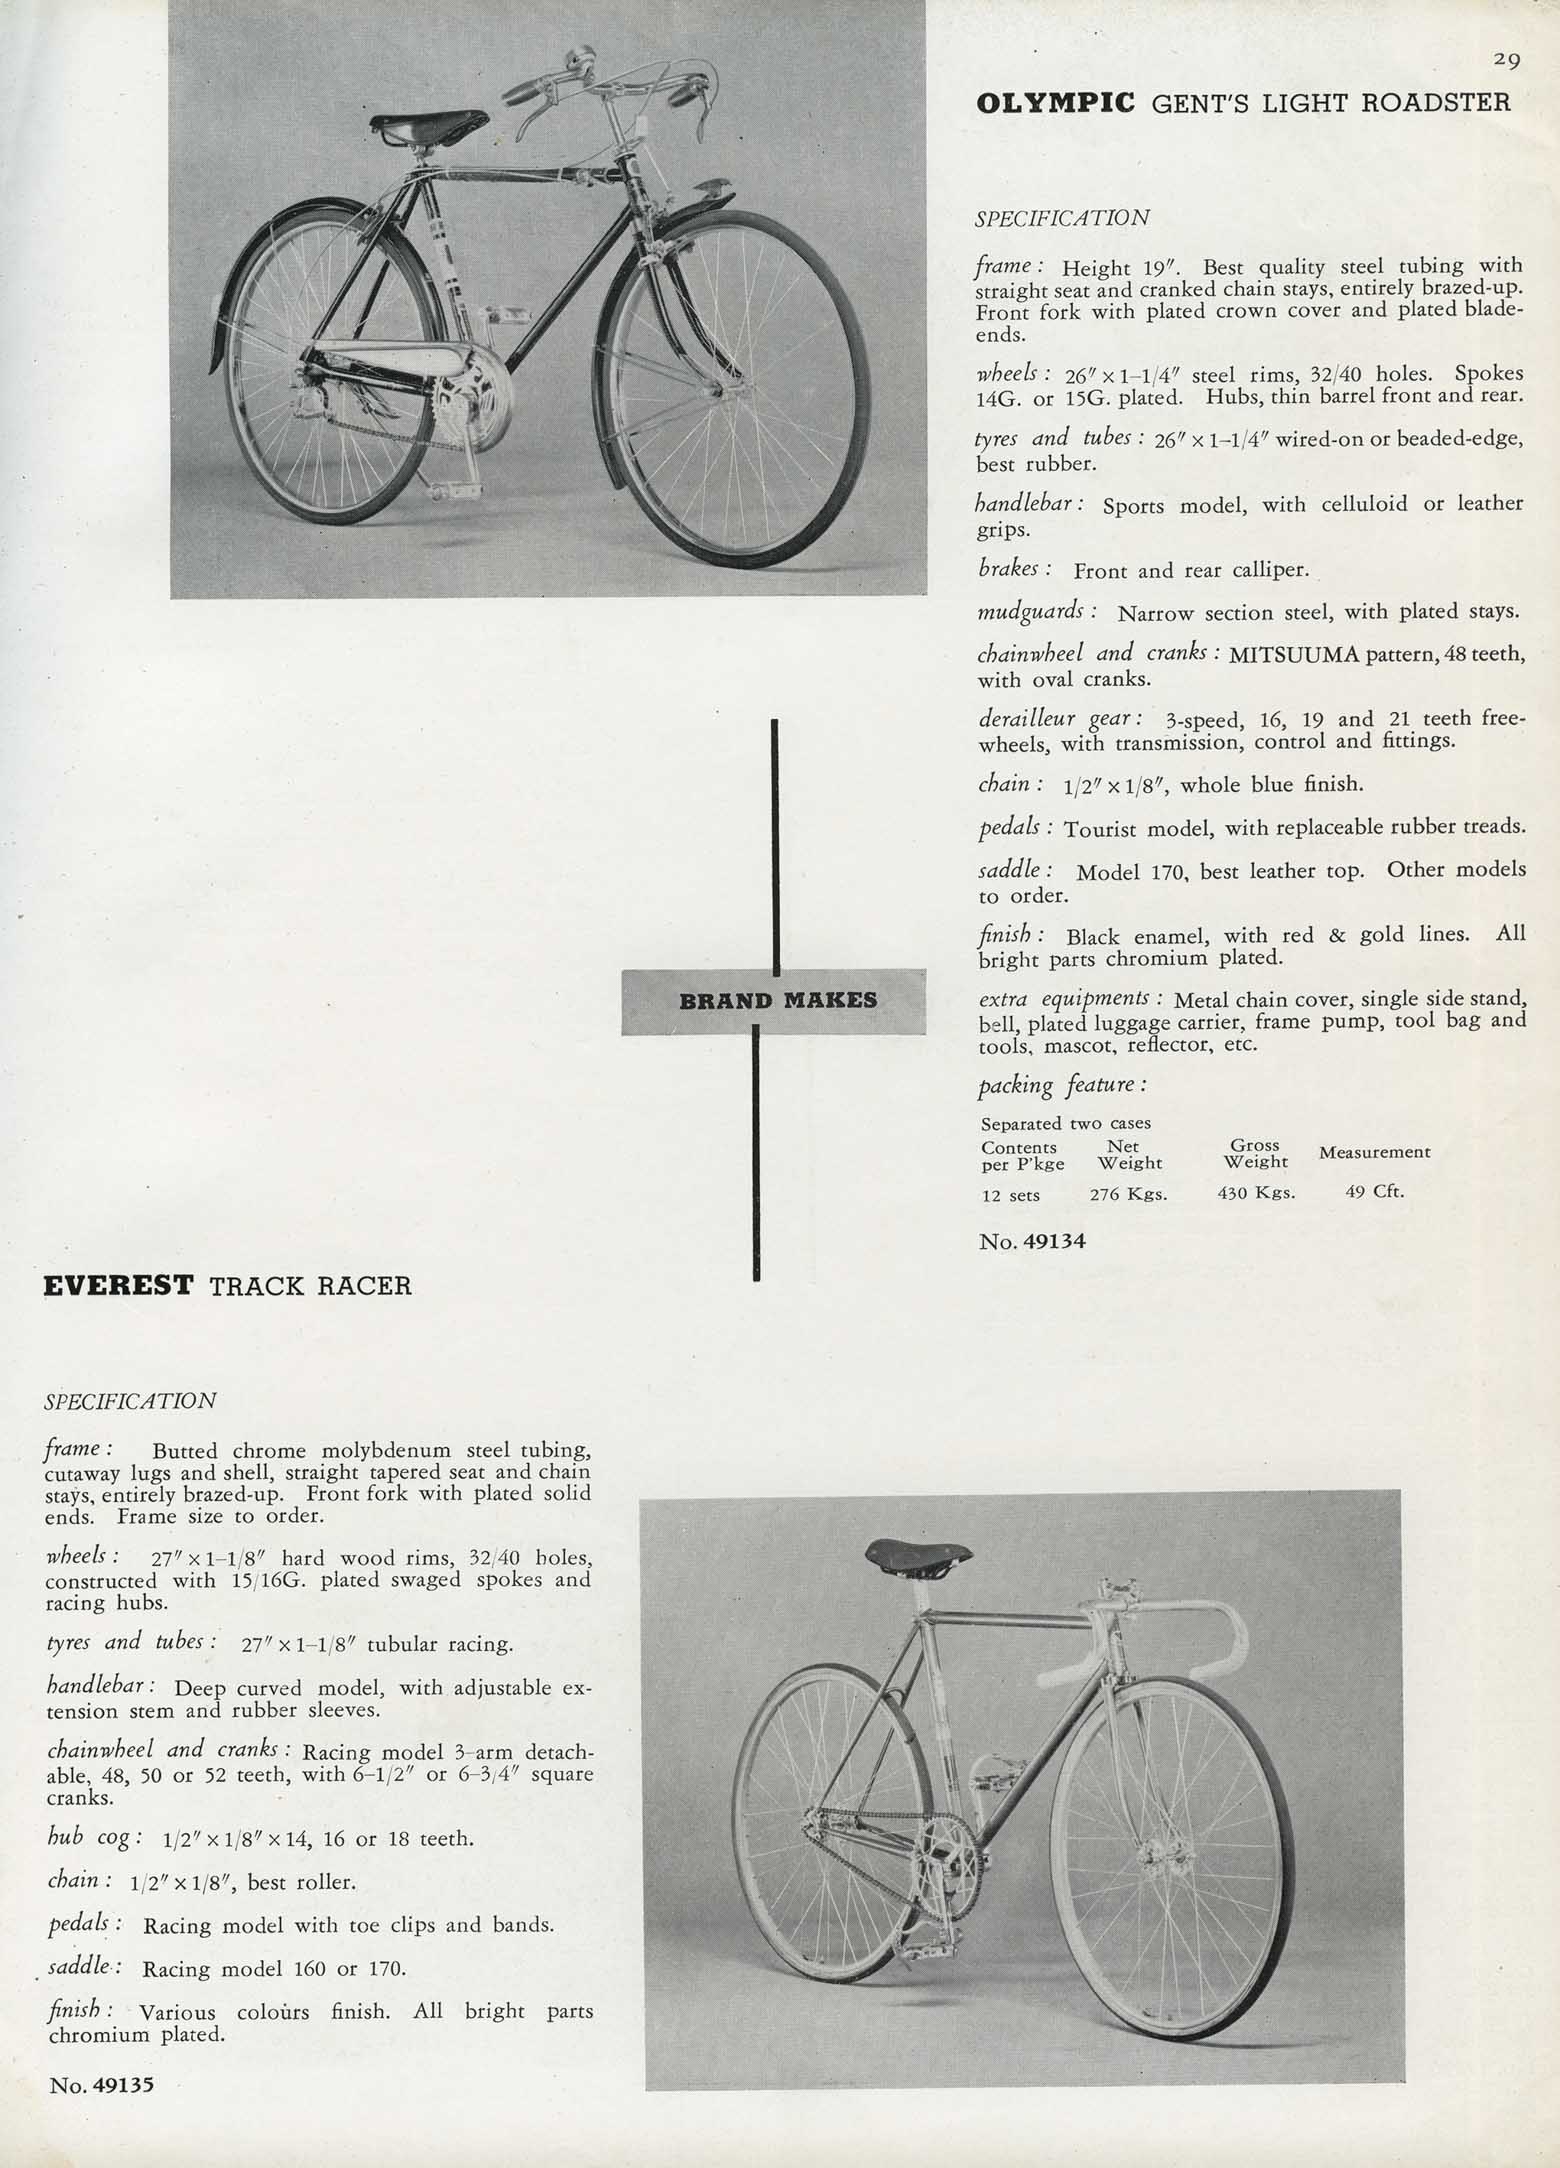 Japan's Bicycle Guide '56 - page 029 main image